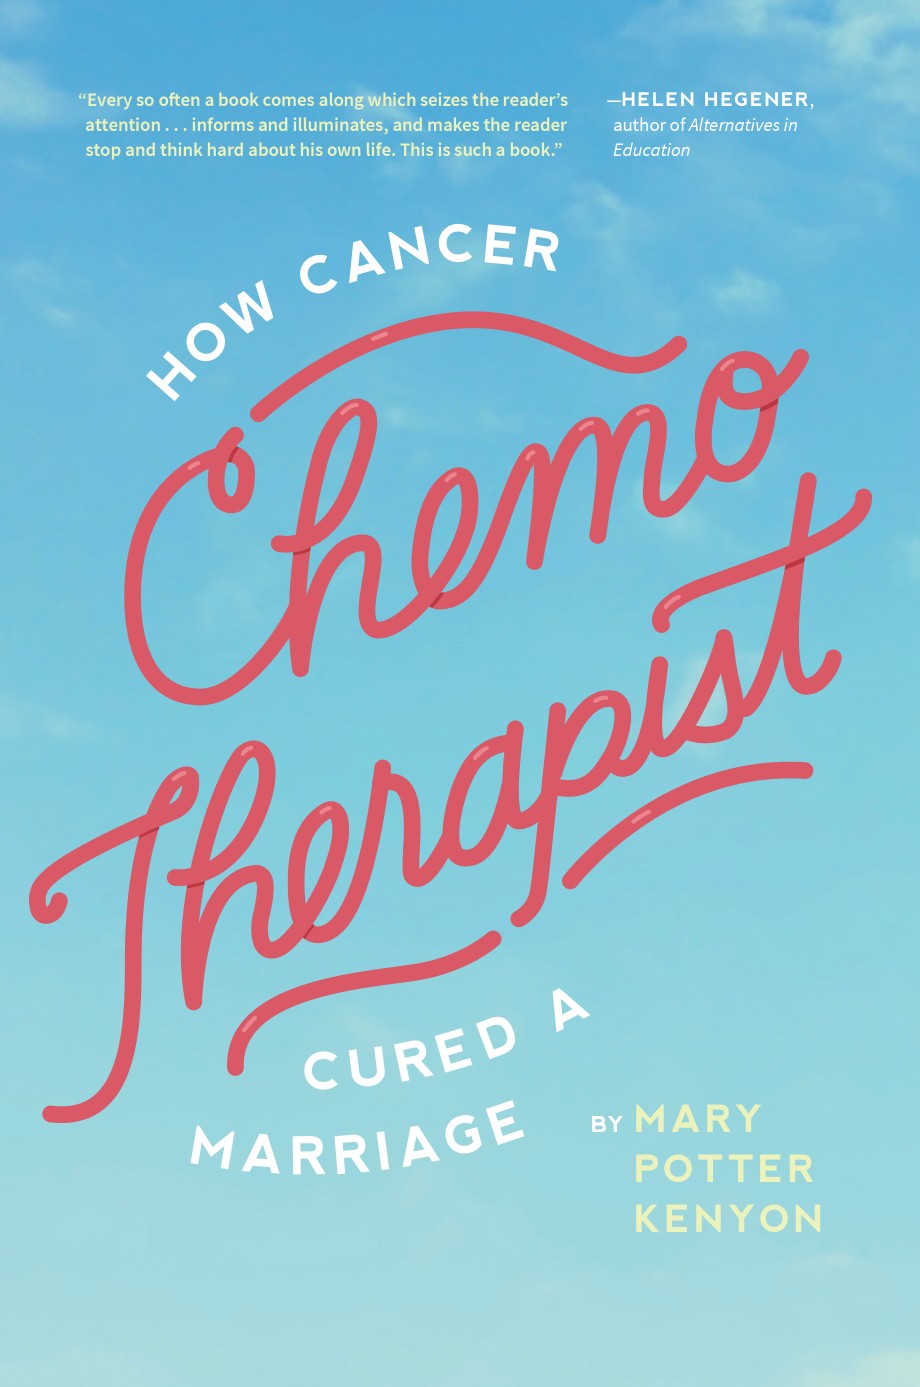 Chemo-Therapist How Cancer Cured a Marriage